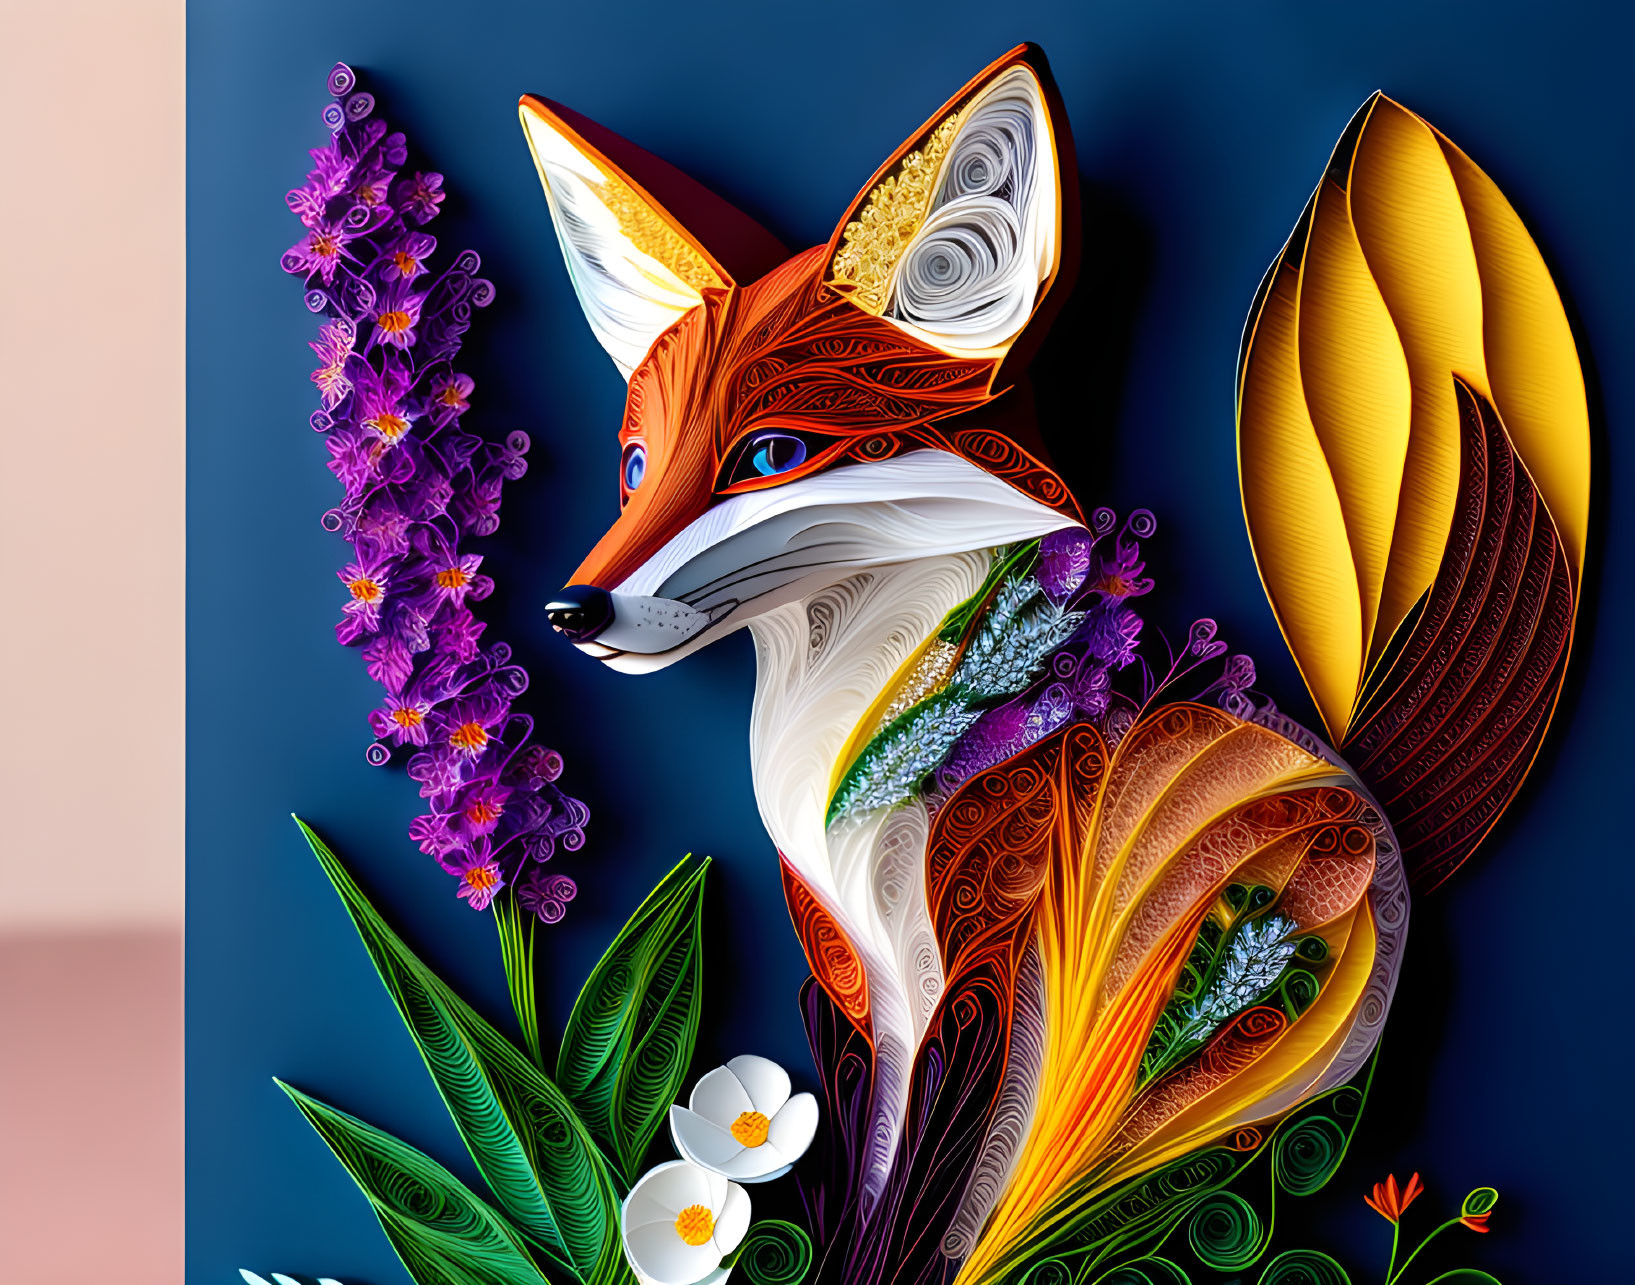 Vibrant Fox Paper Art with Floral Designs on Blue Background